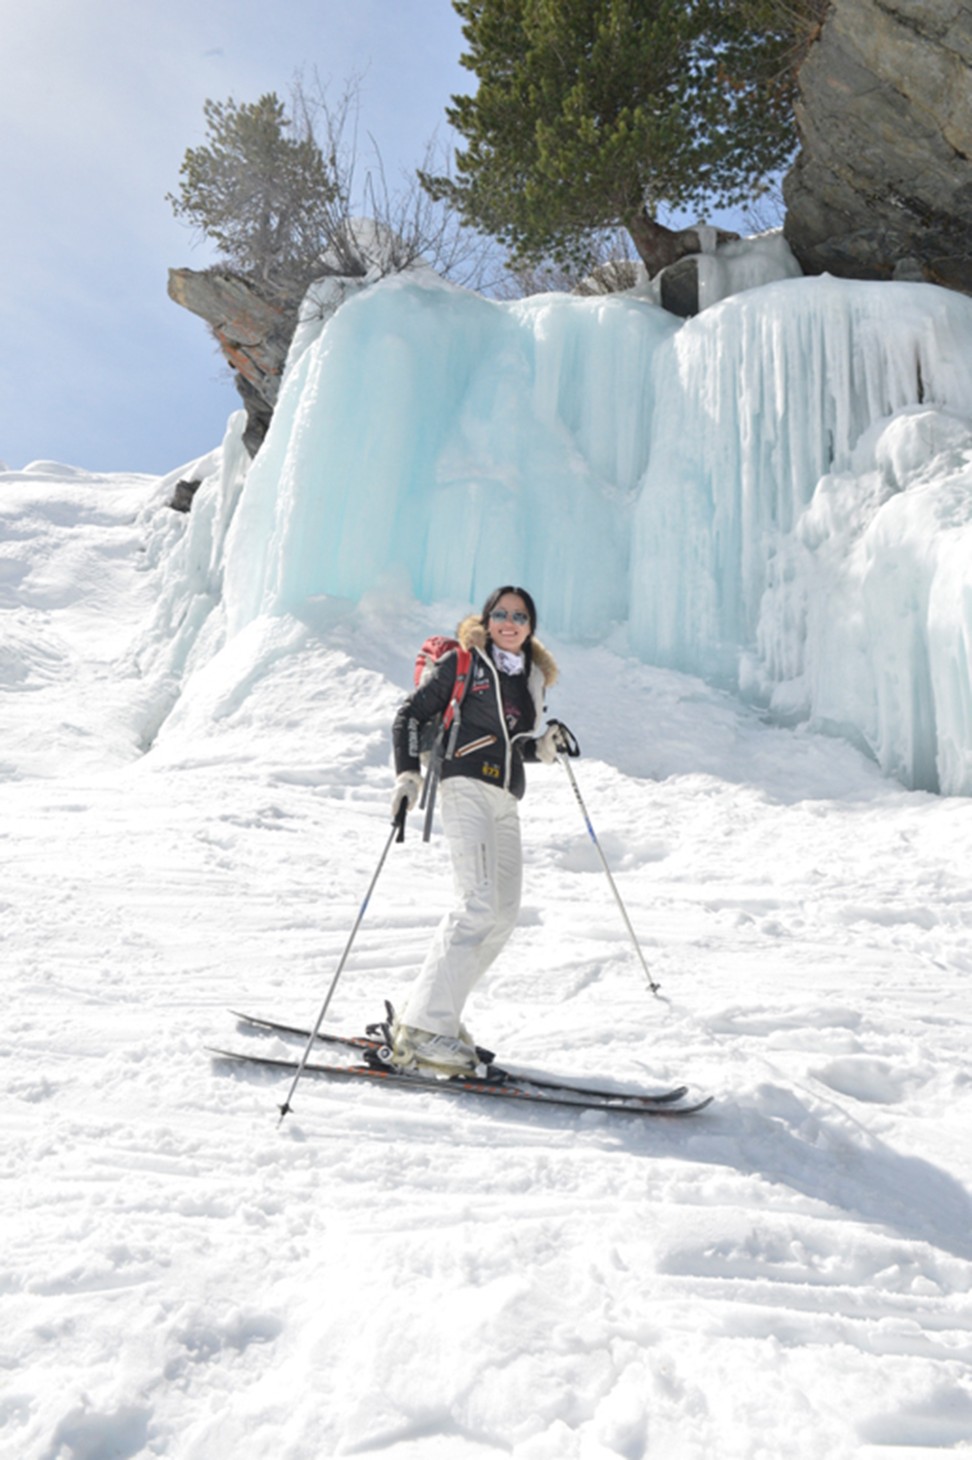 Hsueh learned skiing, rock climbing and paragliding to overcome her fear of heights. Photo: Courtesy of Shaolan Hsueh